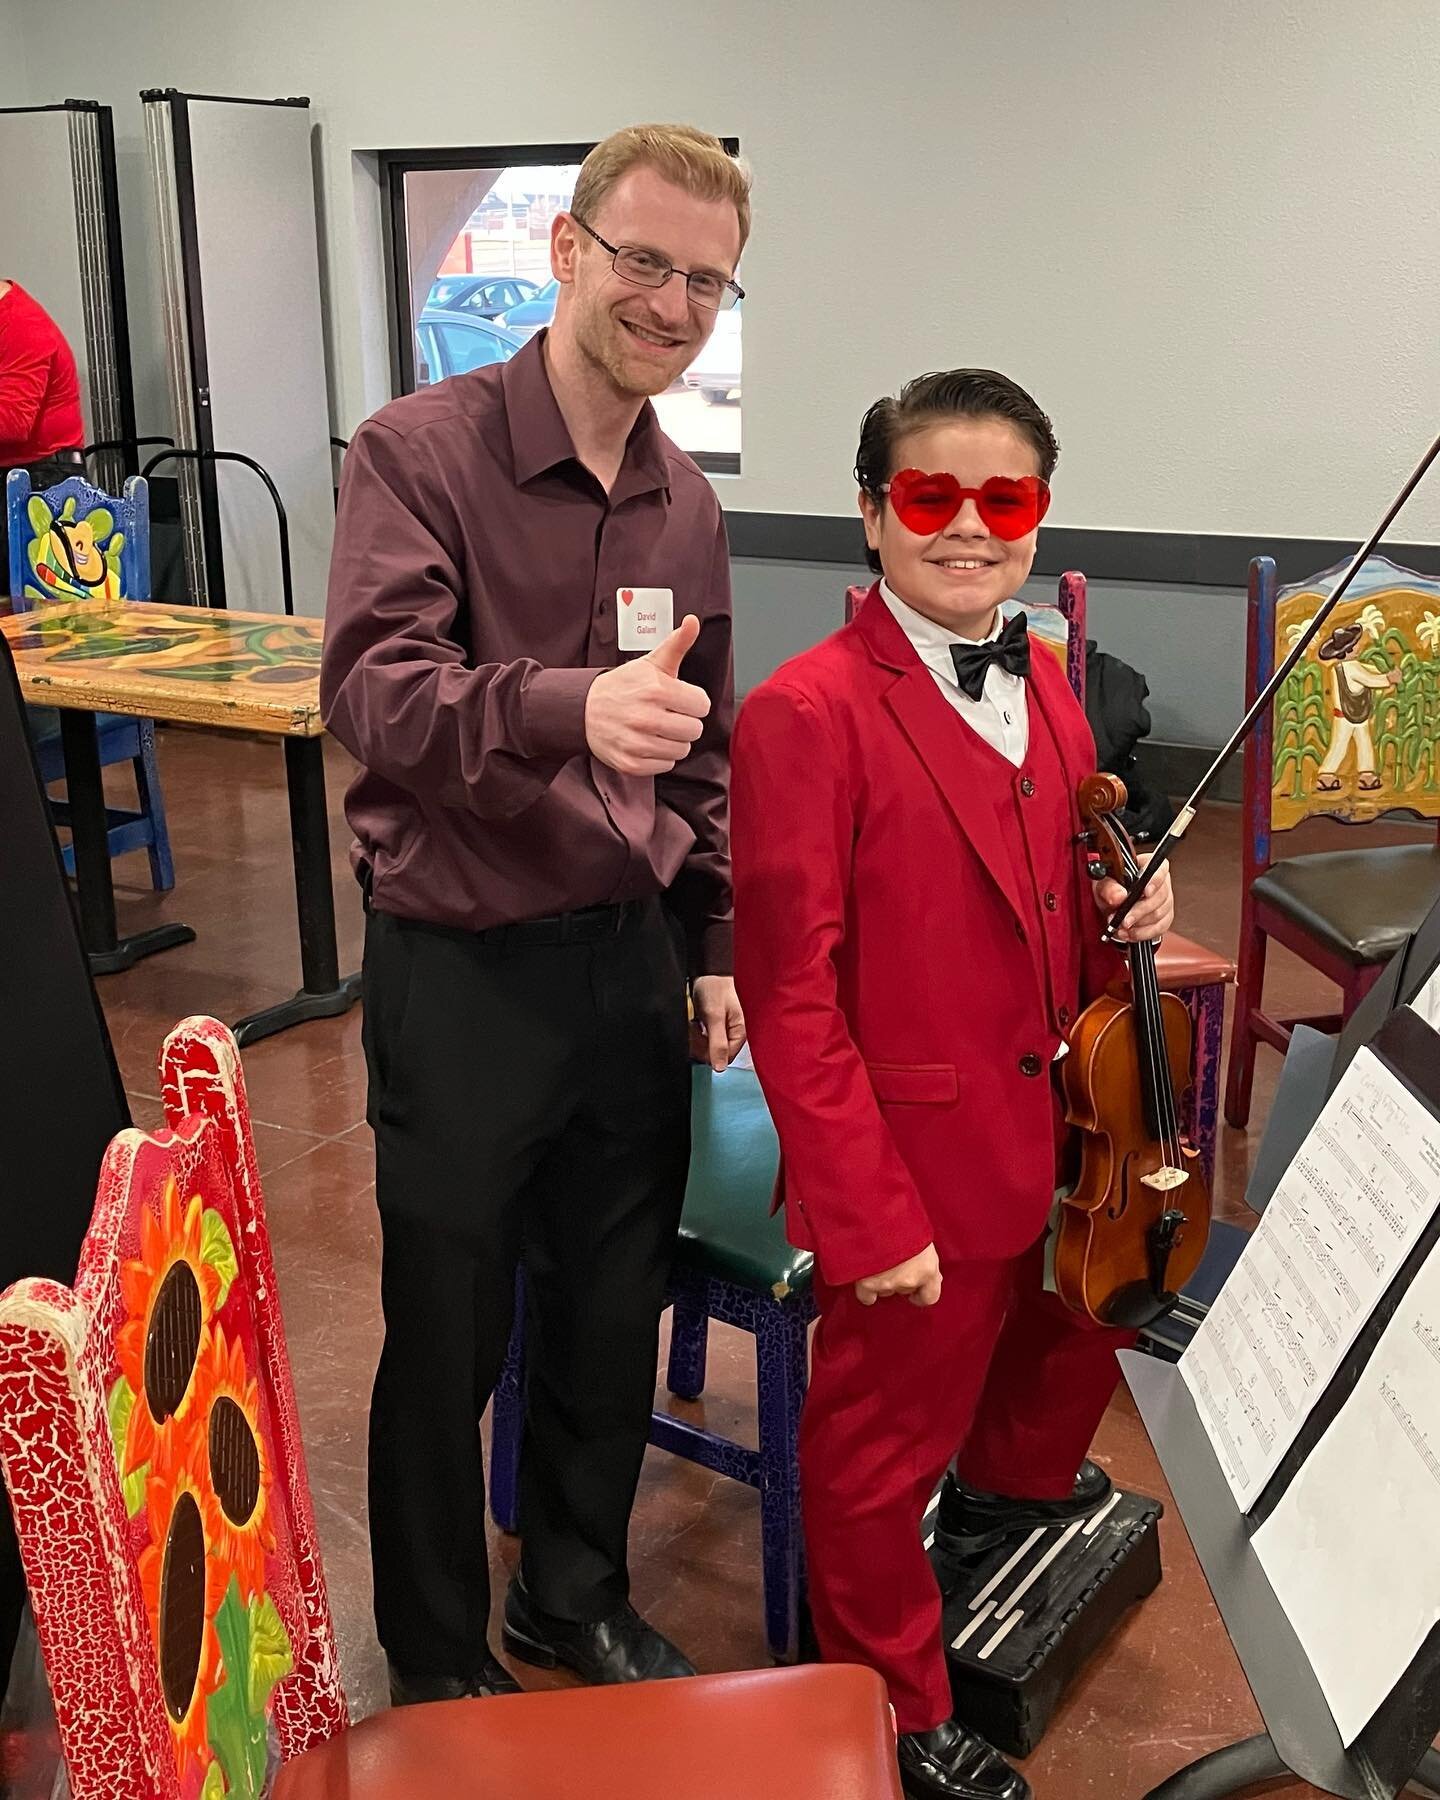 Our Kanesville Symphony Orchestra string group was able to perform for the Sweetheart Banquet at La Mesa. We definitely dressed for the occasion!!